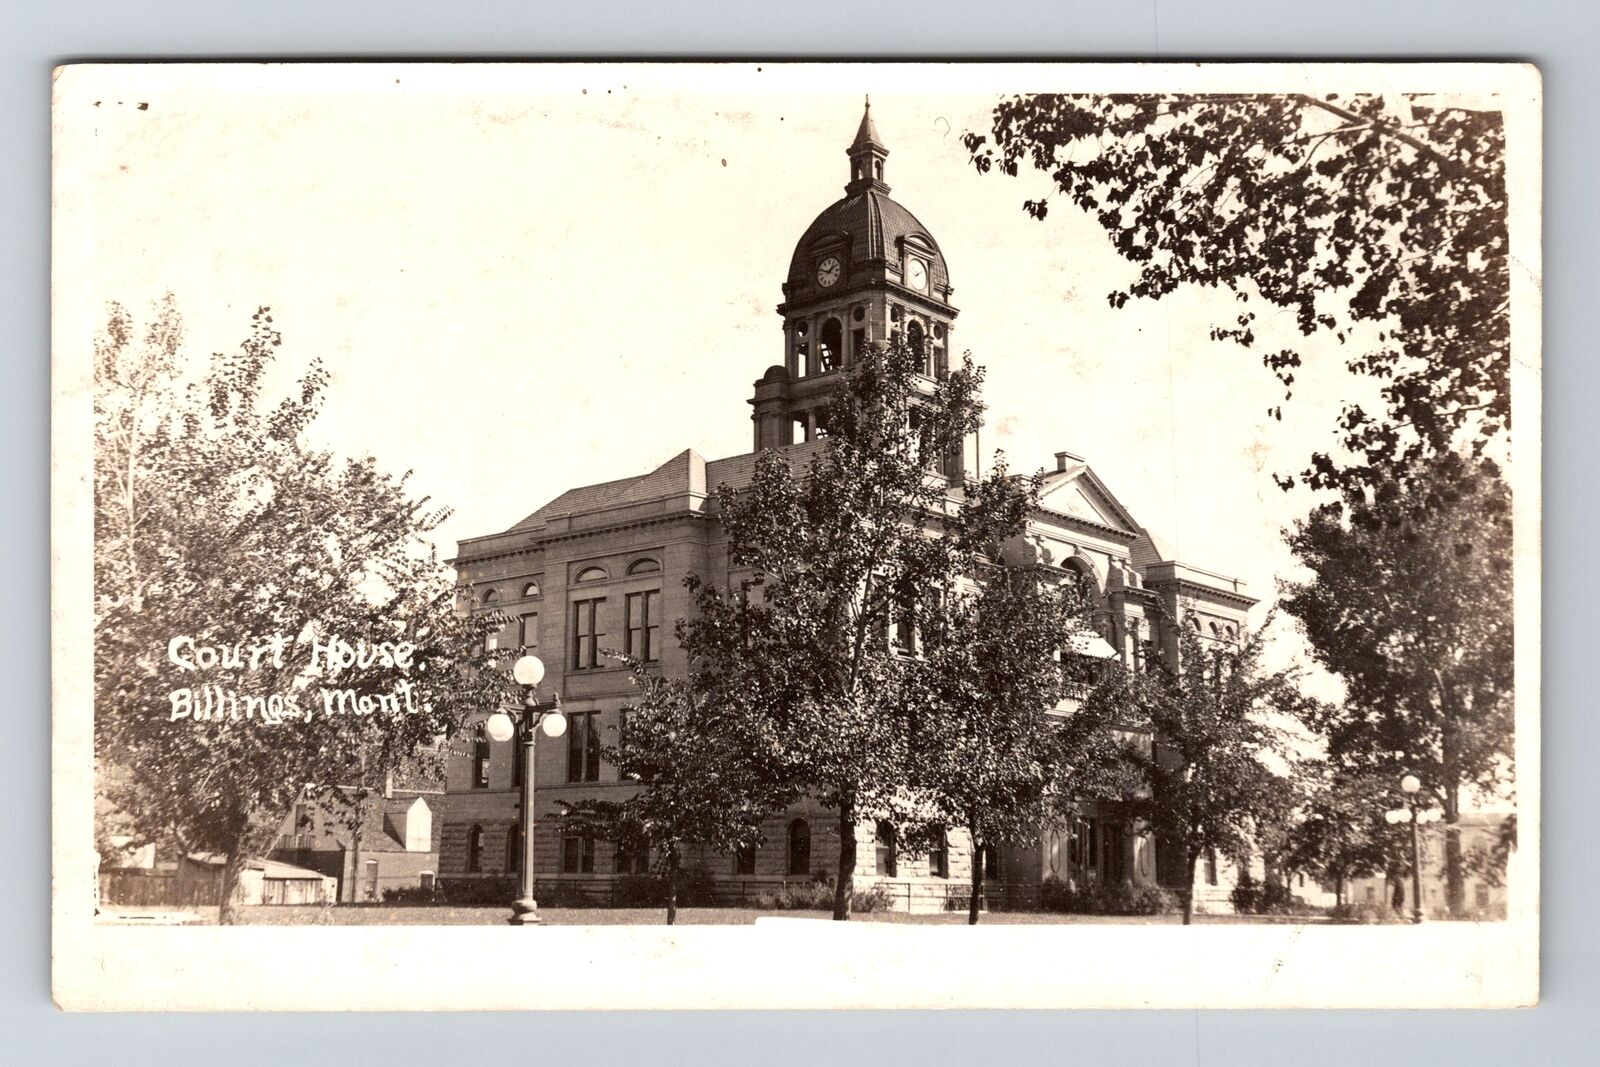 Billings MT RPPC Yellowstone County Courthouse Real Photo c1910 Vintage Postcard